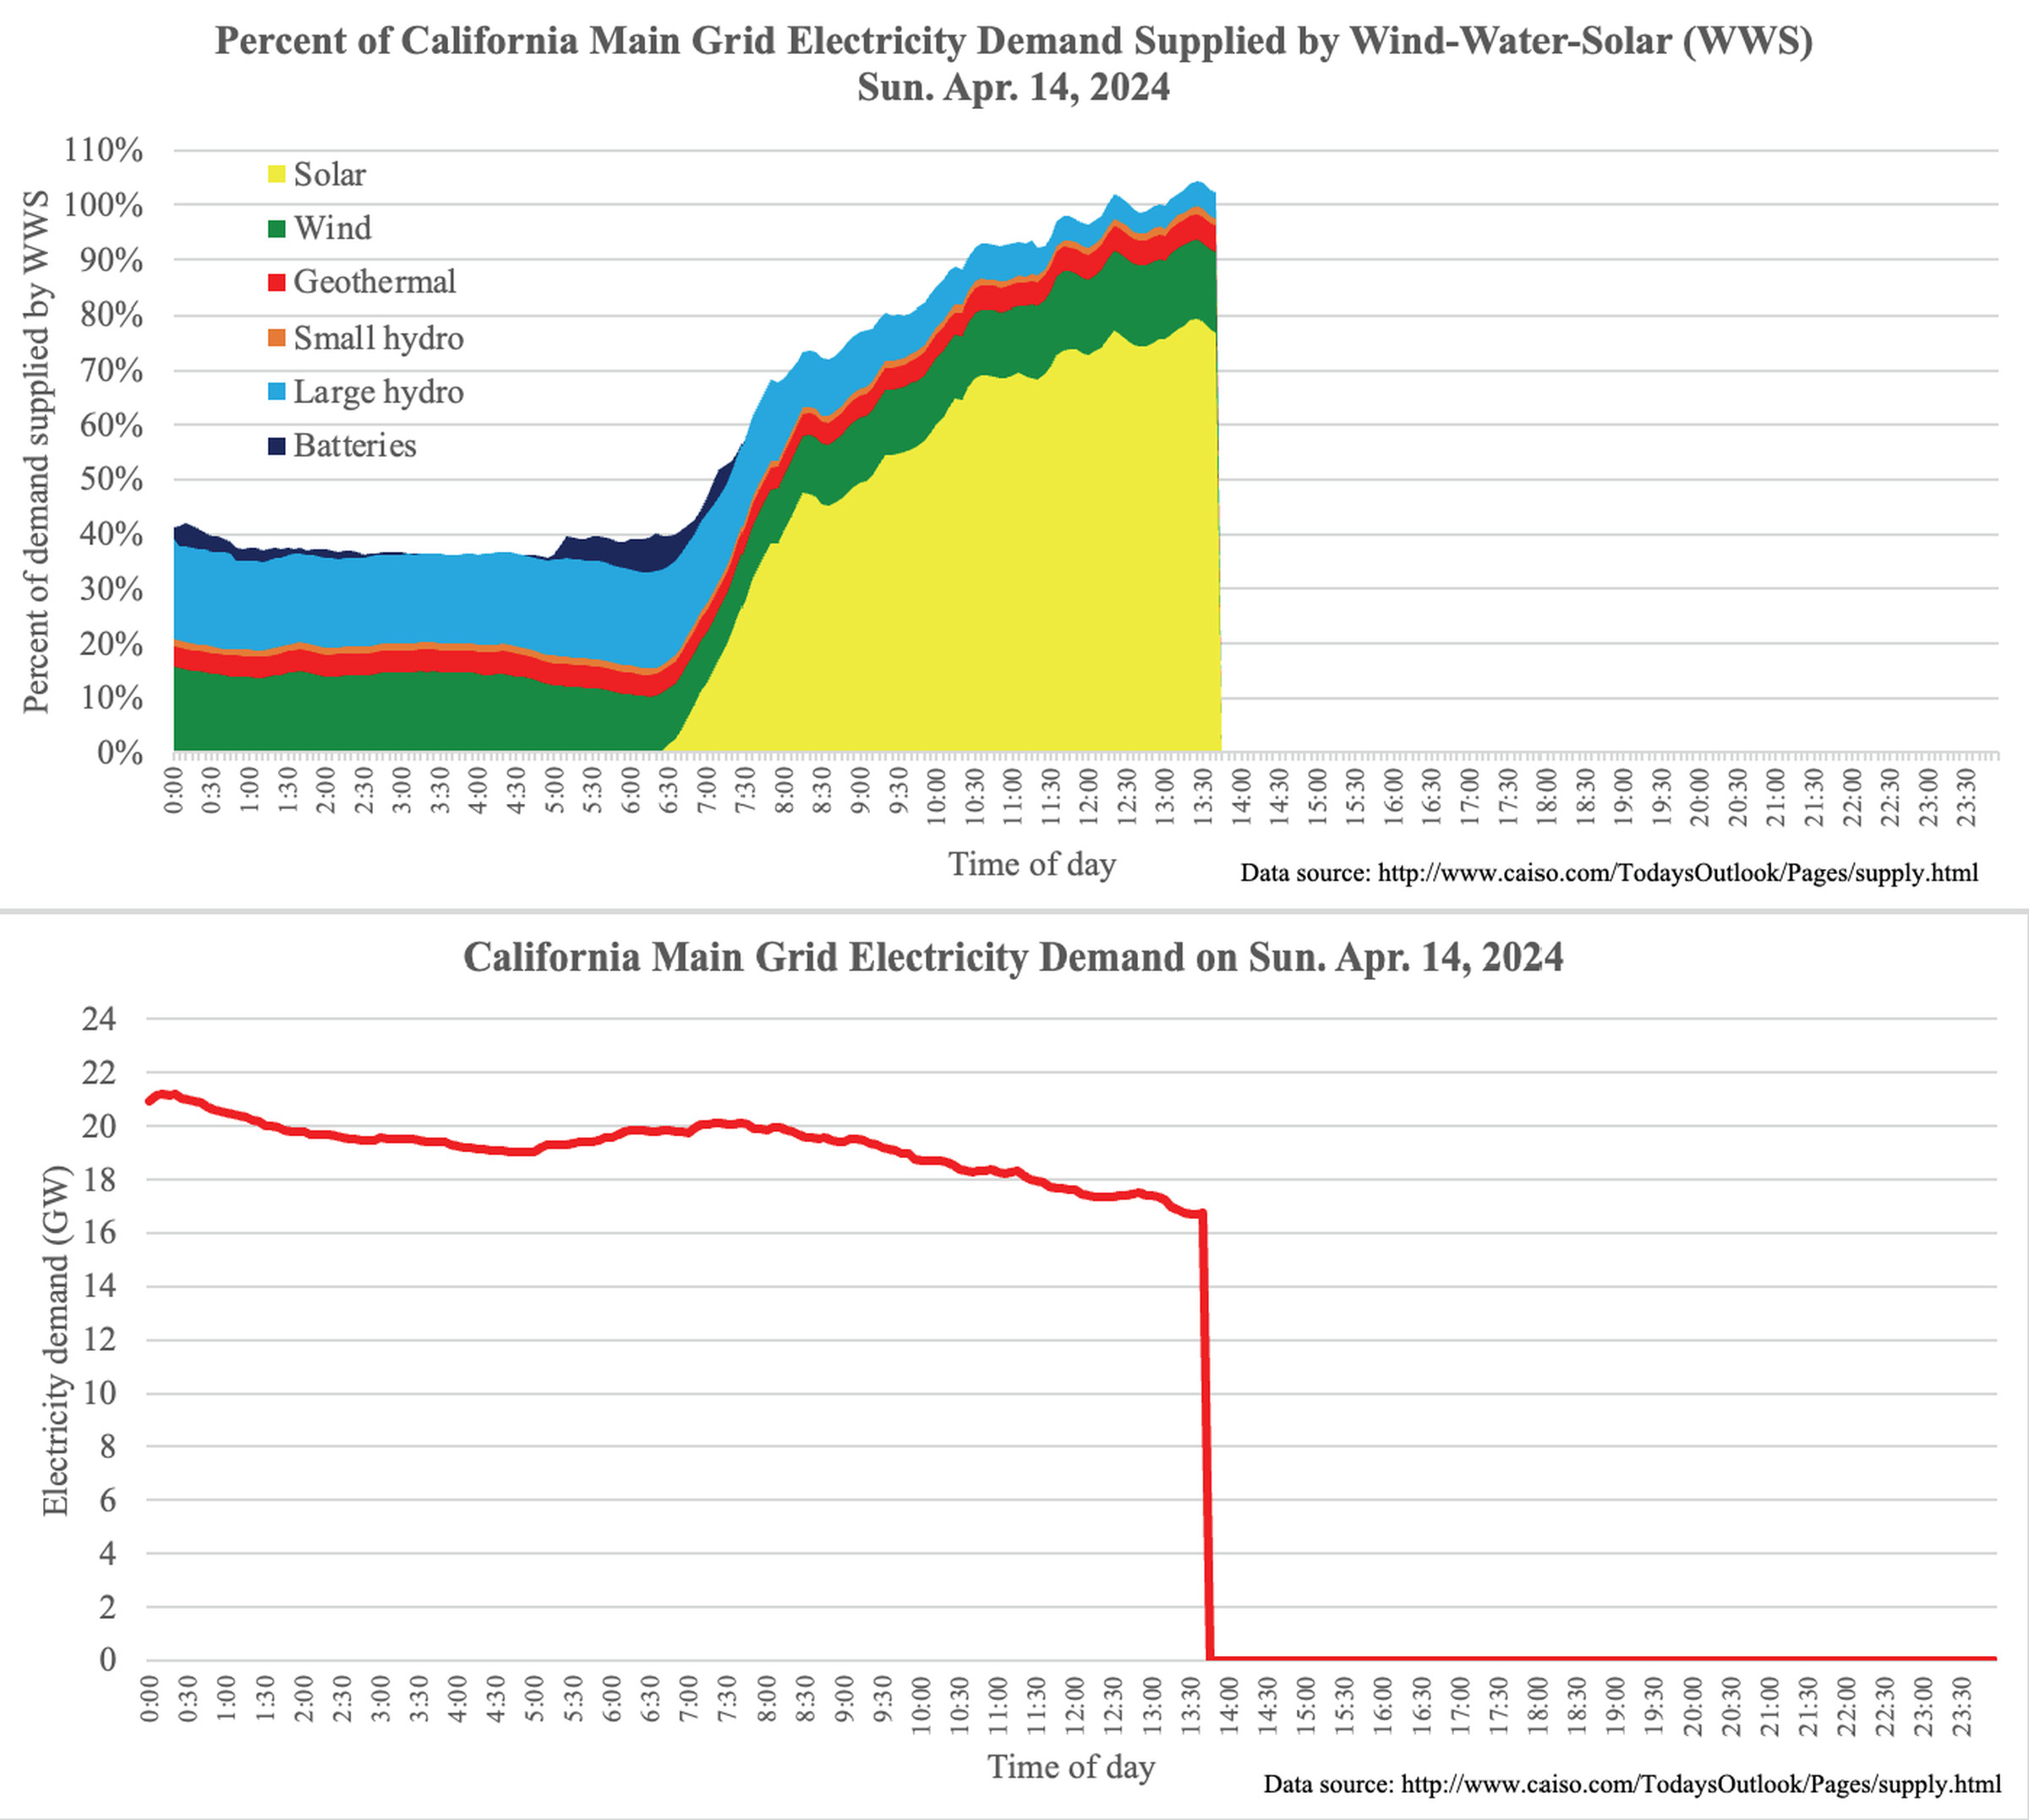 Graph showing Percent of California Main Grid Electricity Demand Supplied by Wind-Water-Solar on April 14th.